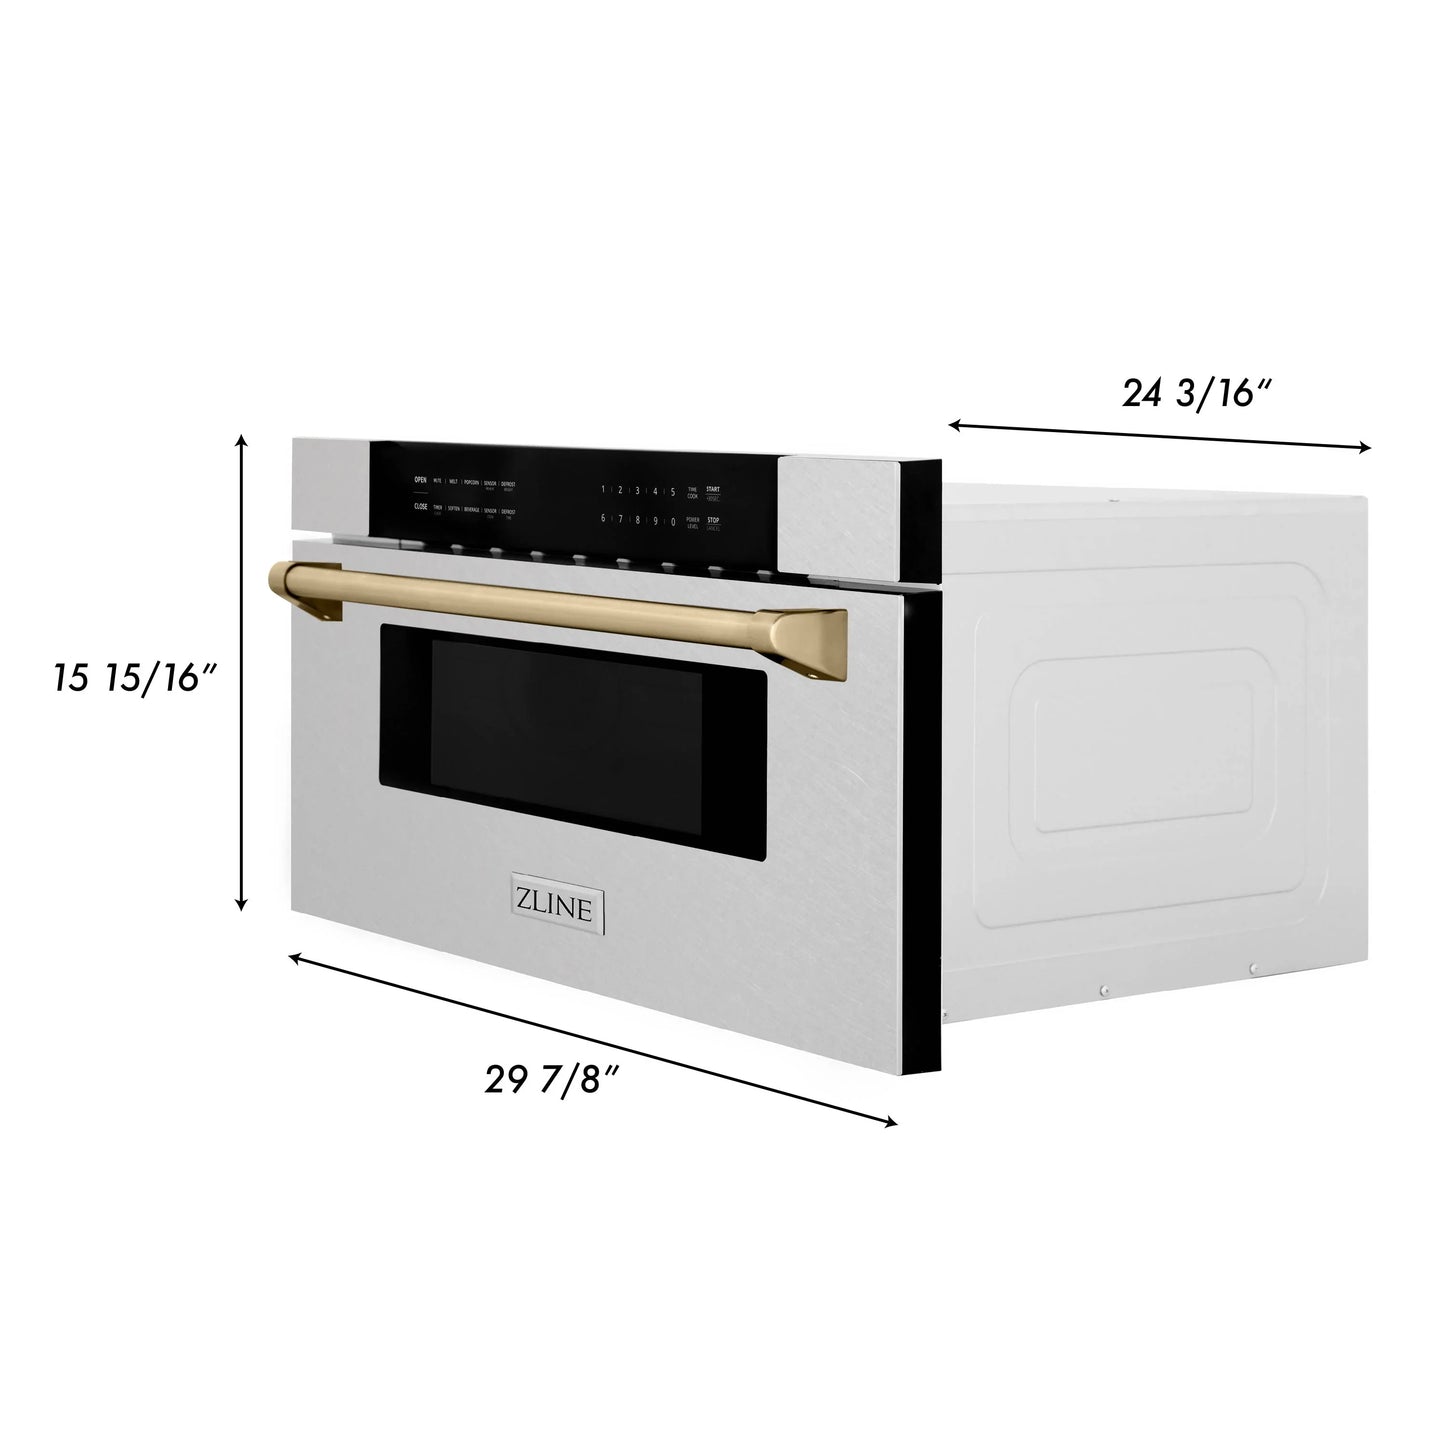 ZLINE Autograph Edition 30" Built-In Microwave Drawer in Fingerprint Resistant Stainless Steel with Accents